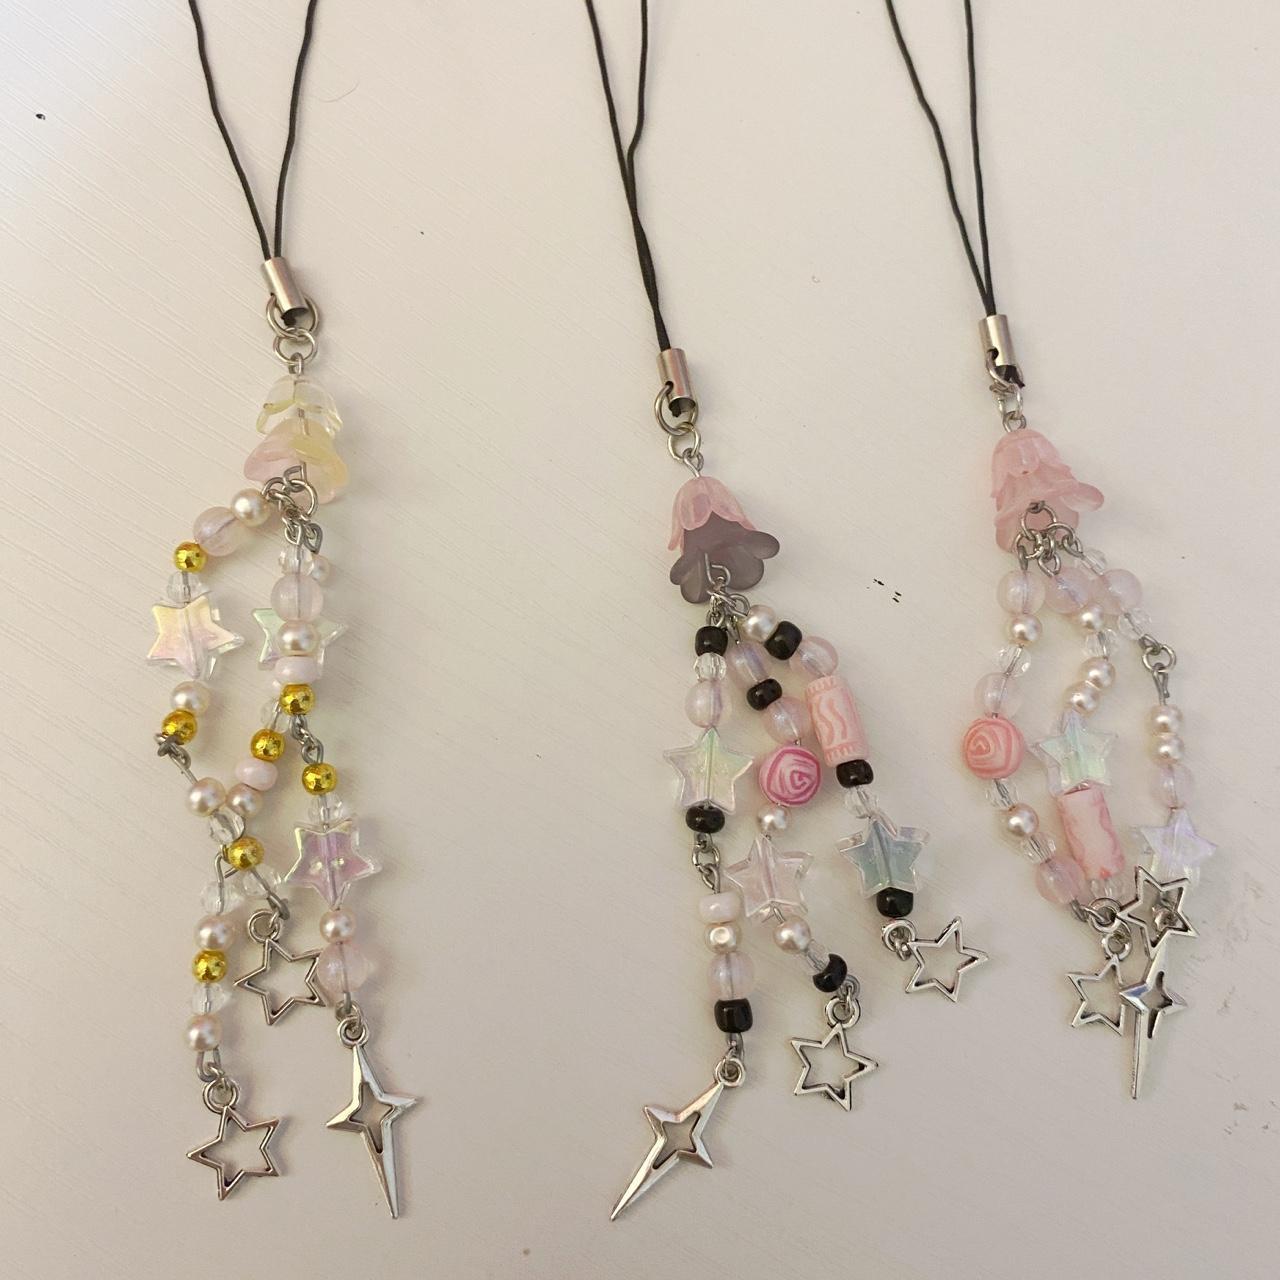 Women's White and Pink Jewellery